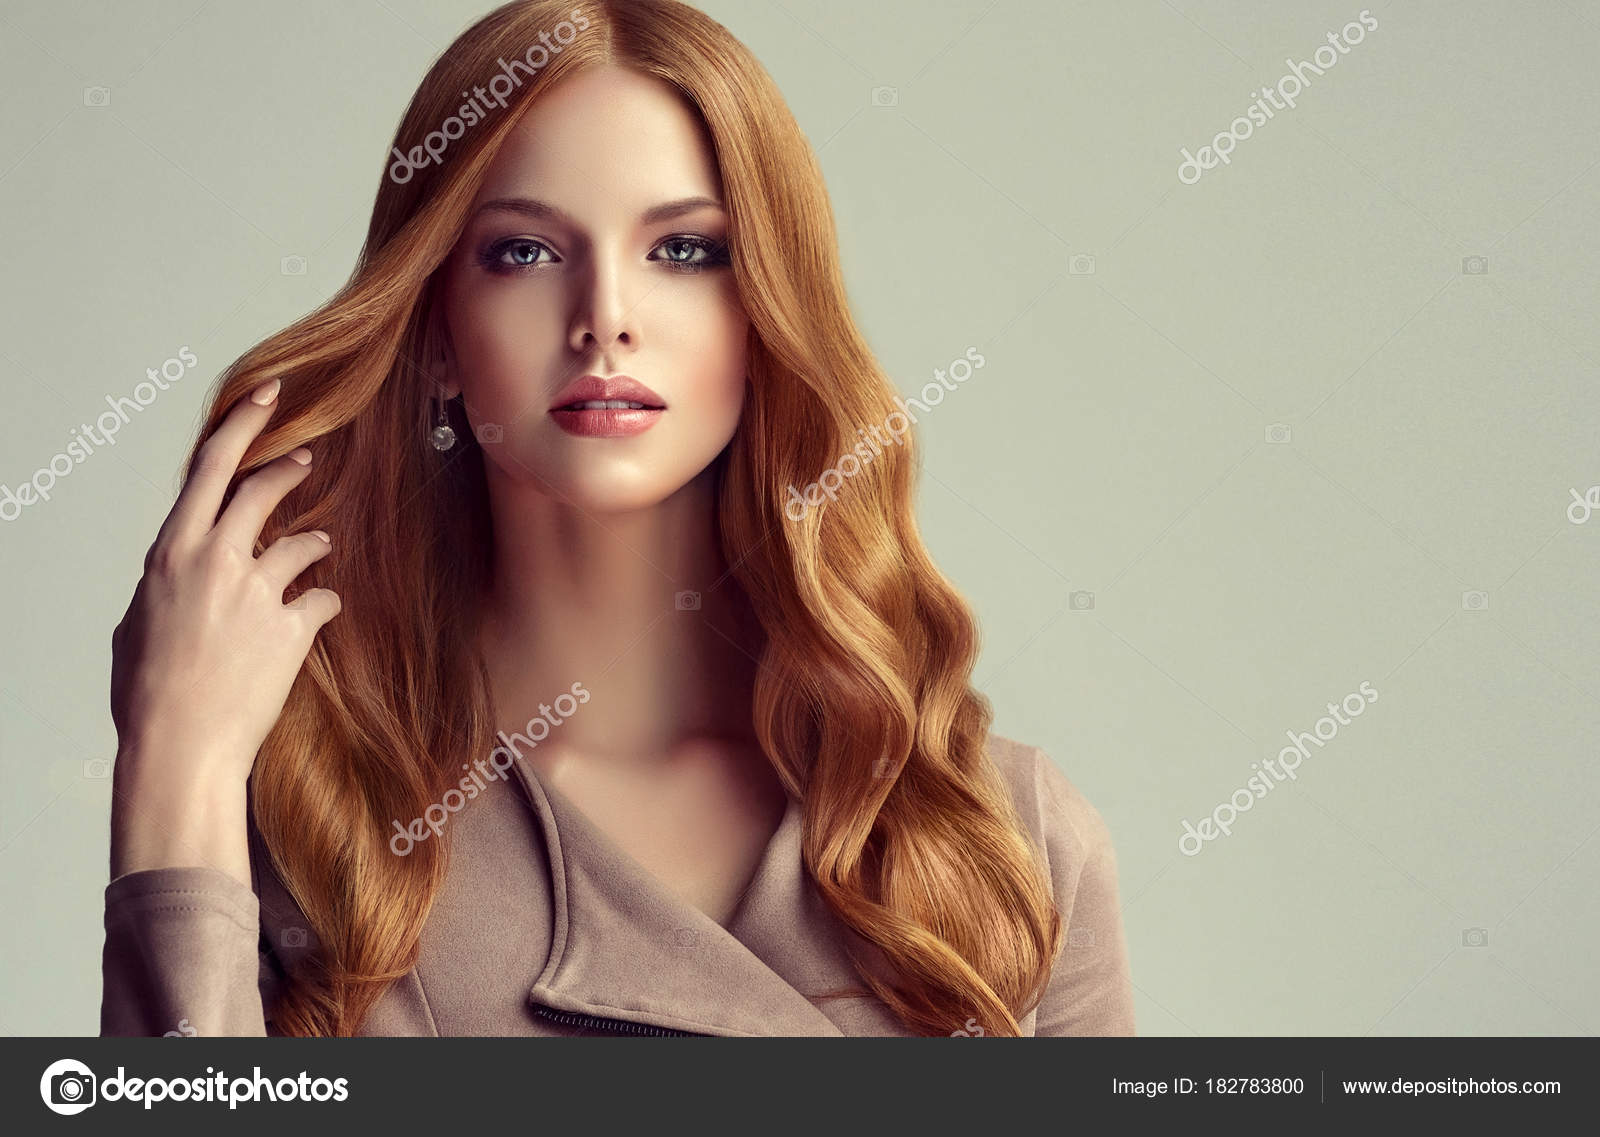 Red Hair Girl Long Shiny Curly Hair Beautiful Model Woman Stock Photo By Sofia Zhuravets